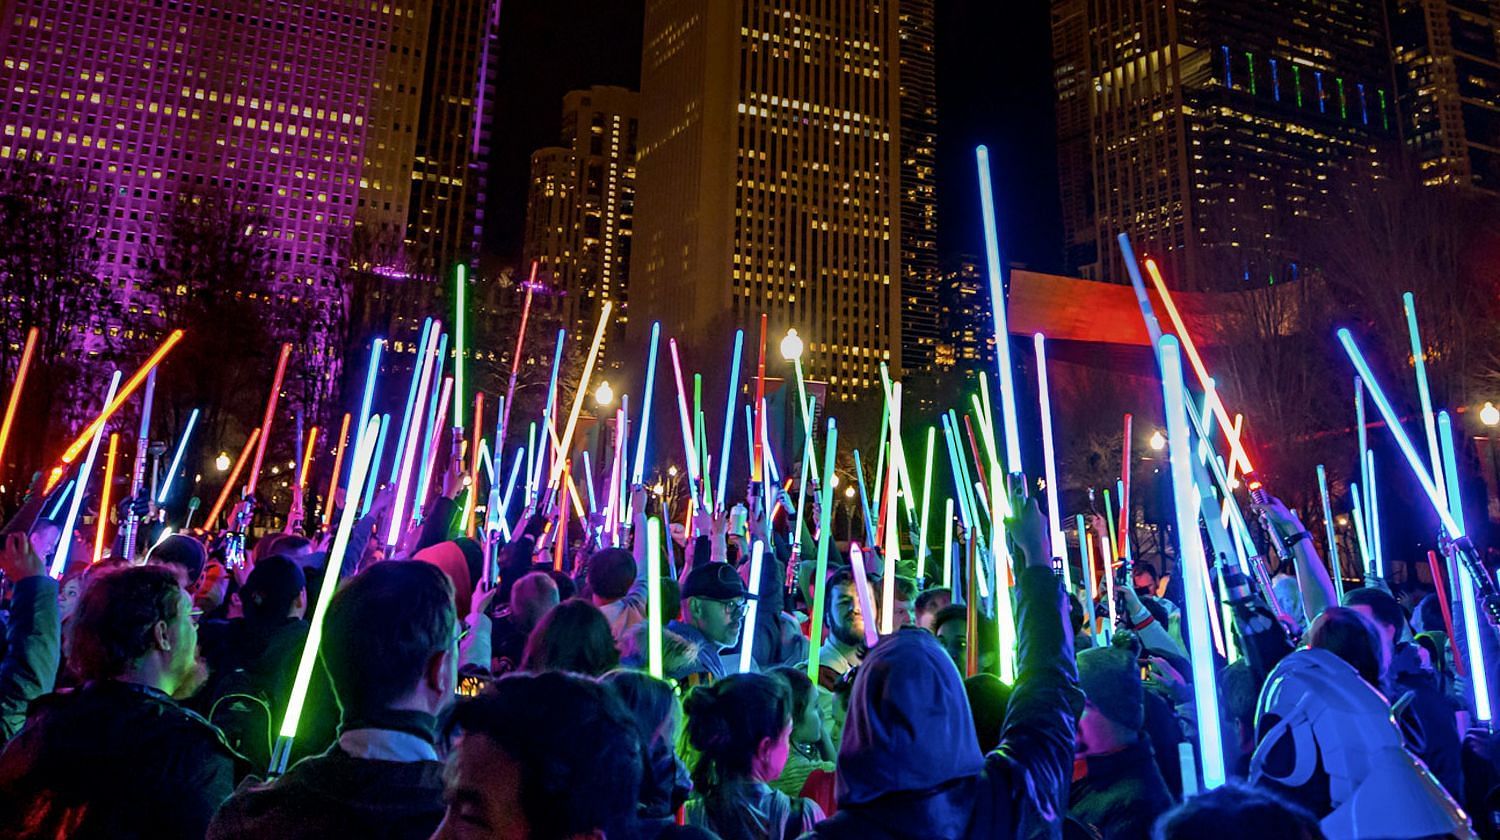 Star Wars celebration 2023: A must-attend event for fans (Image via Getty)